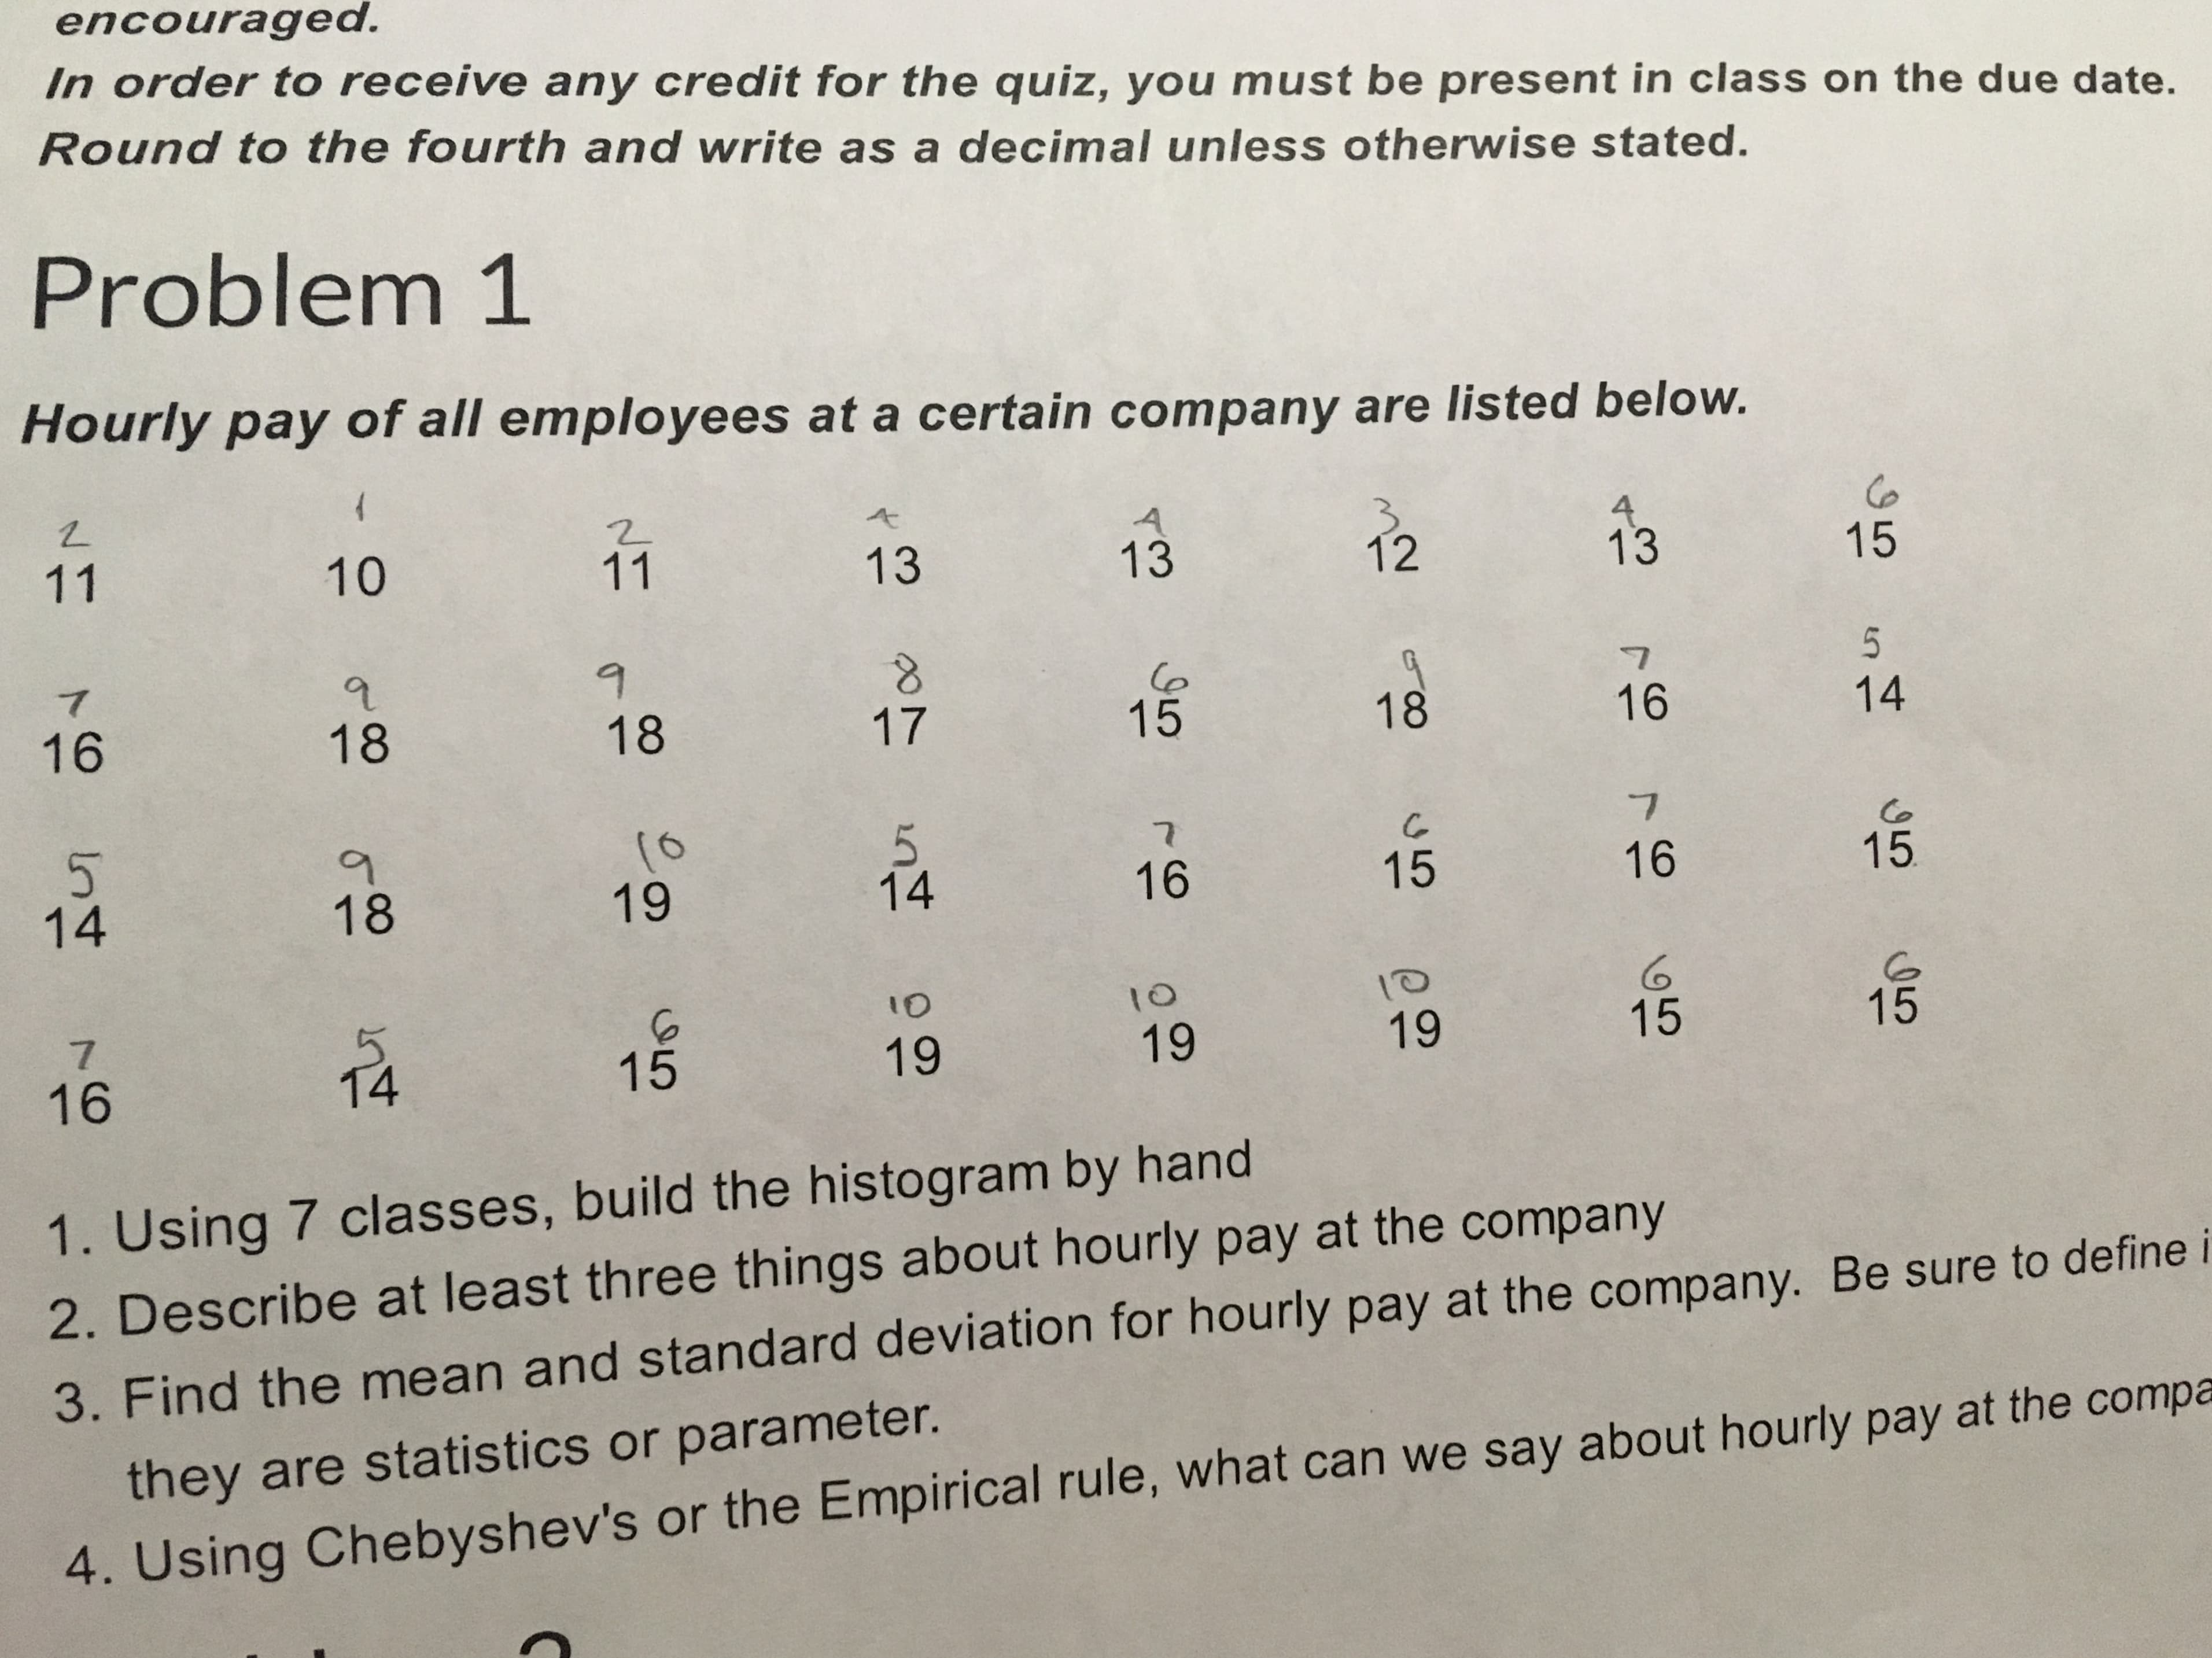 encouraged.
In order to receive any credit for the quiz, you must be present in class on the due date.
Round to the fourth and write as a decimal unless otherwise stated.
Problem 1
Hourly pay of all employees at a certain company are listed below.
Ce
15
4
13
11
10
11
13
12
13
5
16
18
15
18
18
17
16
14
(0
19
5.
14
Co
15
16
15
16
14
18
10
7
14
15
15
19
19
19
15
16
1. Using 7 classes, build the histogram by hand
2. Describe at least three things about hourly pay at the company
3. Find the mean and standard deviation for hourly pay at the company. Be sure to define i
they are statistics or parameter.
4. Using Chebyshev's or the Empirical rule, what can we say about hourly pay at the compa
